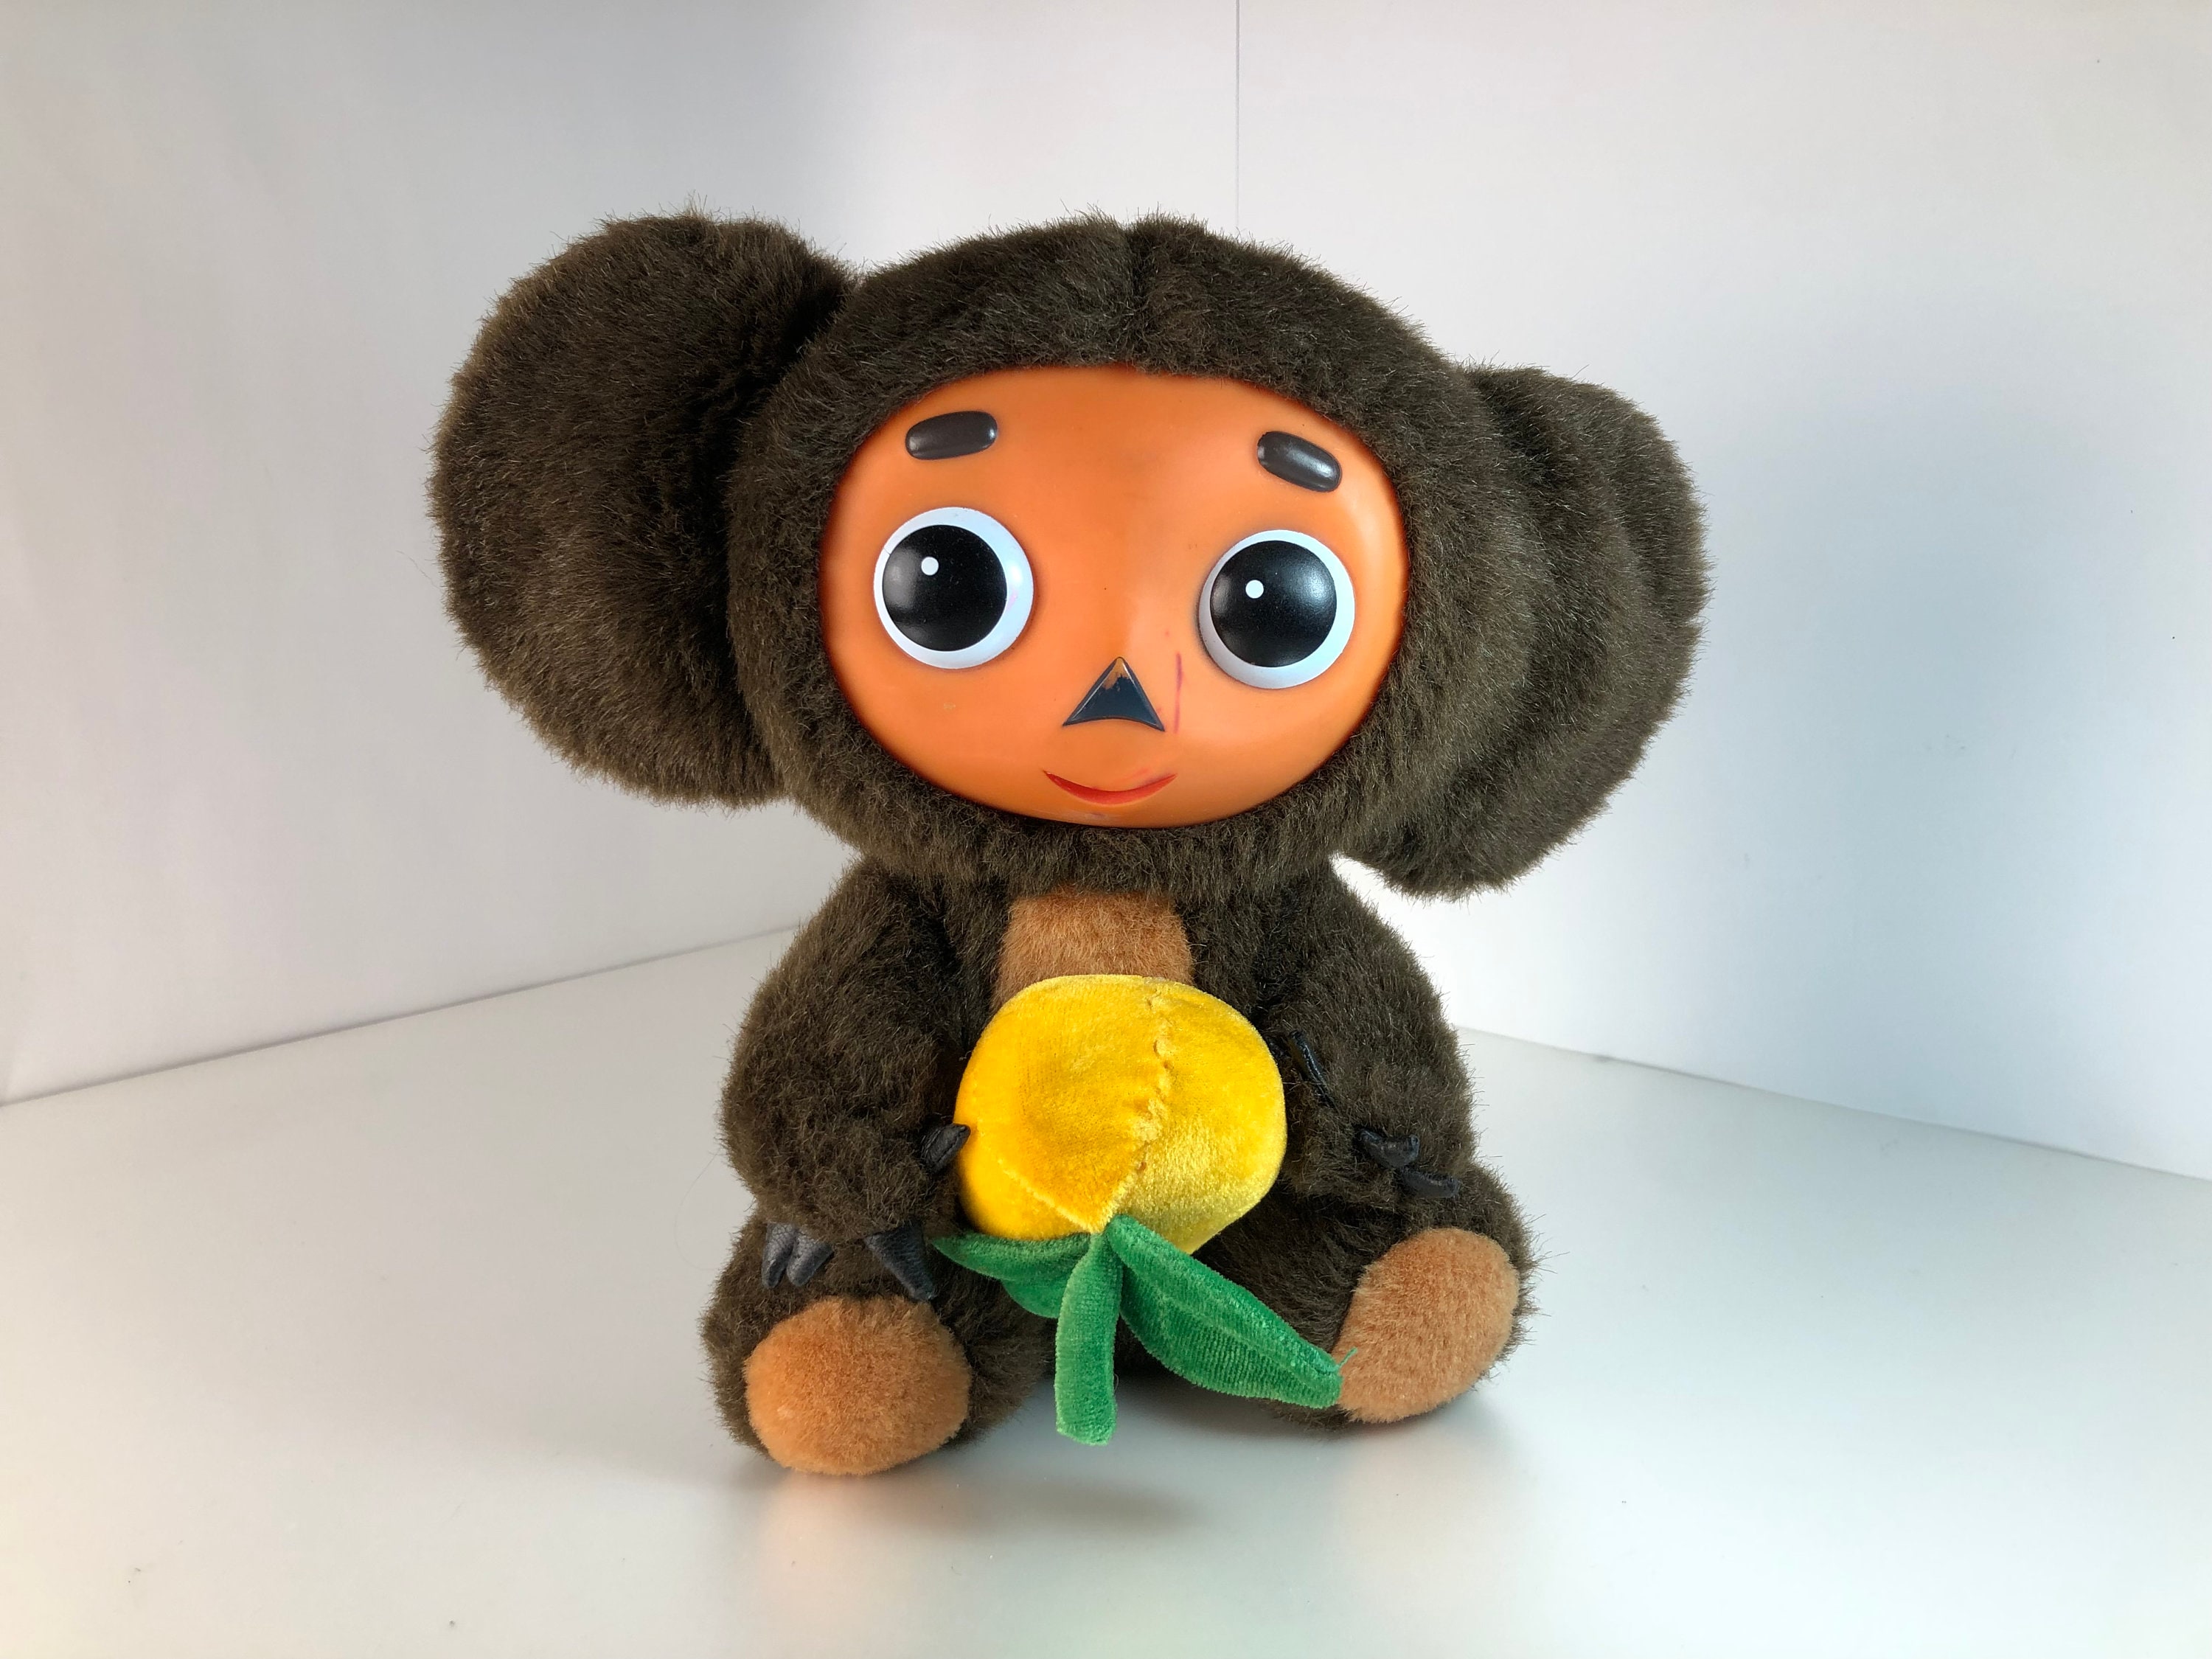 Baby Plush Toy Cheburashka With Big Ears On A Light Background Stock Photo,  Picture and Royalty Free Image. Image 16886910.